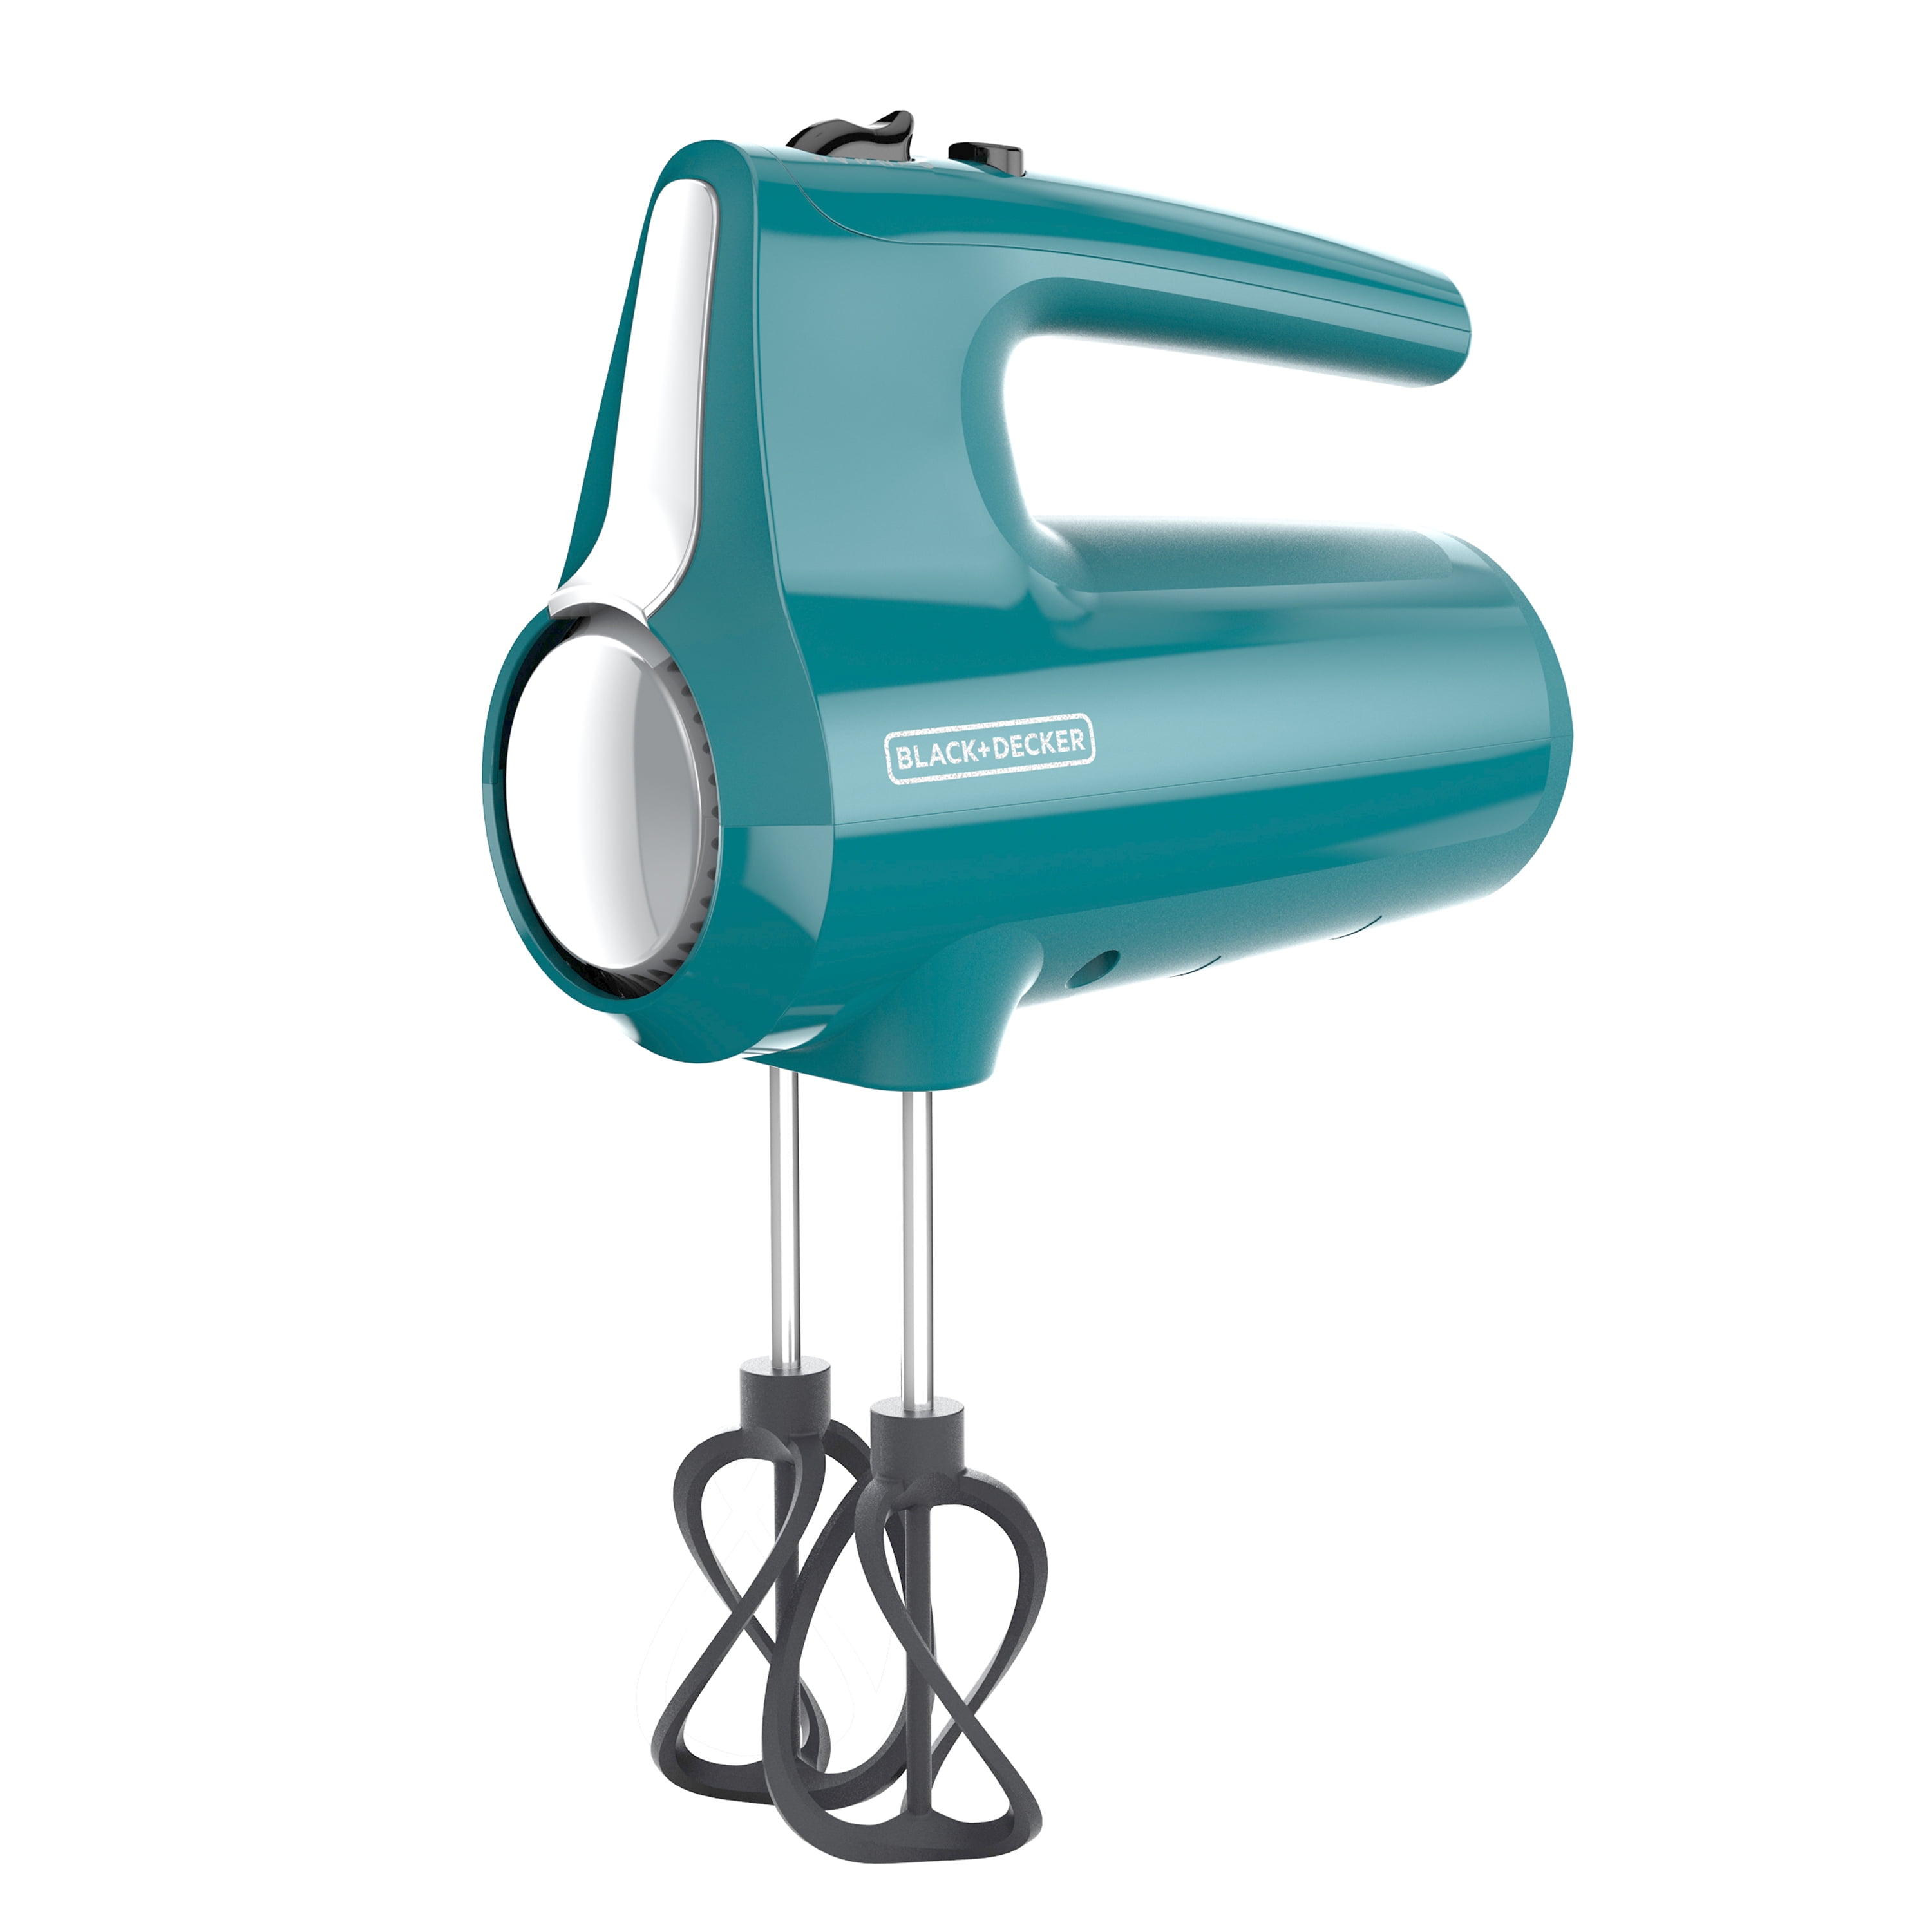 Black And Deck Performance Helix Premium Hand Mixer In Mint : Target